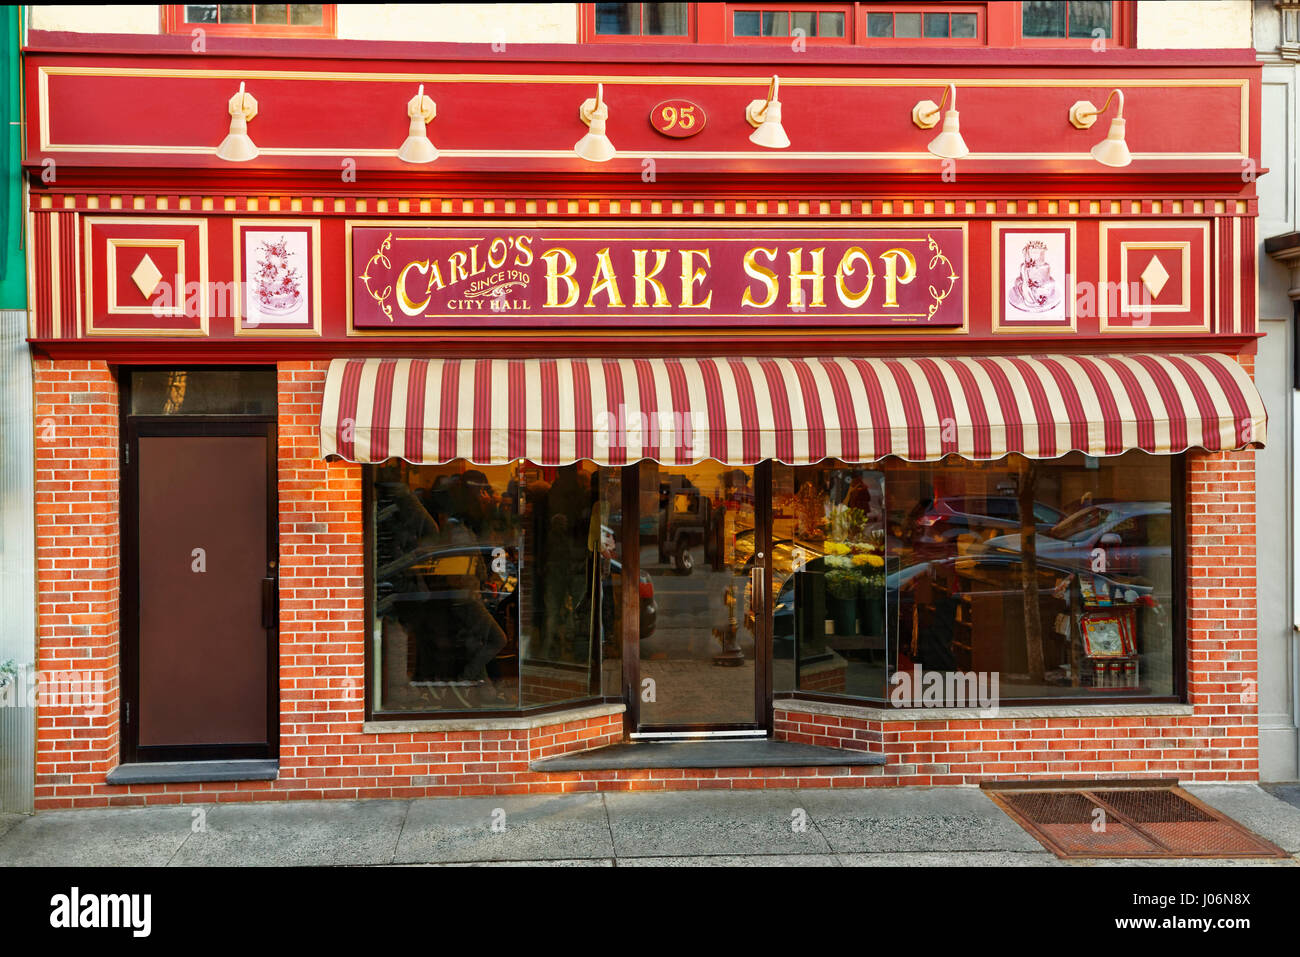 Charitybuzz: Enjoy a Behind the Scenes Tour of Carlo's Bakery & Meet Buddy  Valastro from TLC's Hit Show 